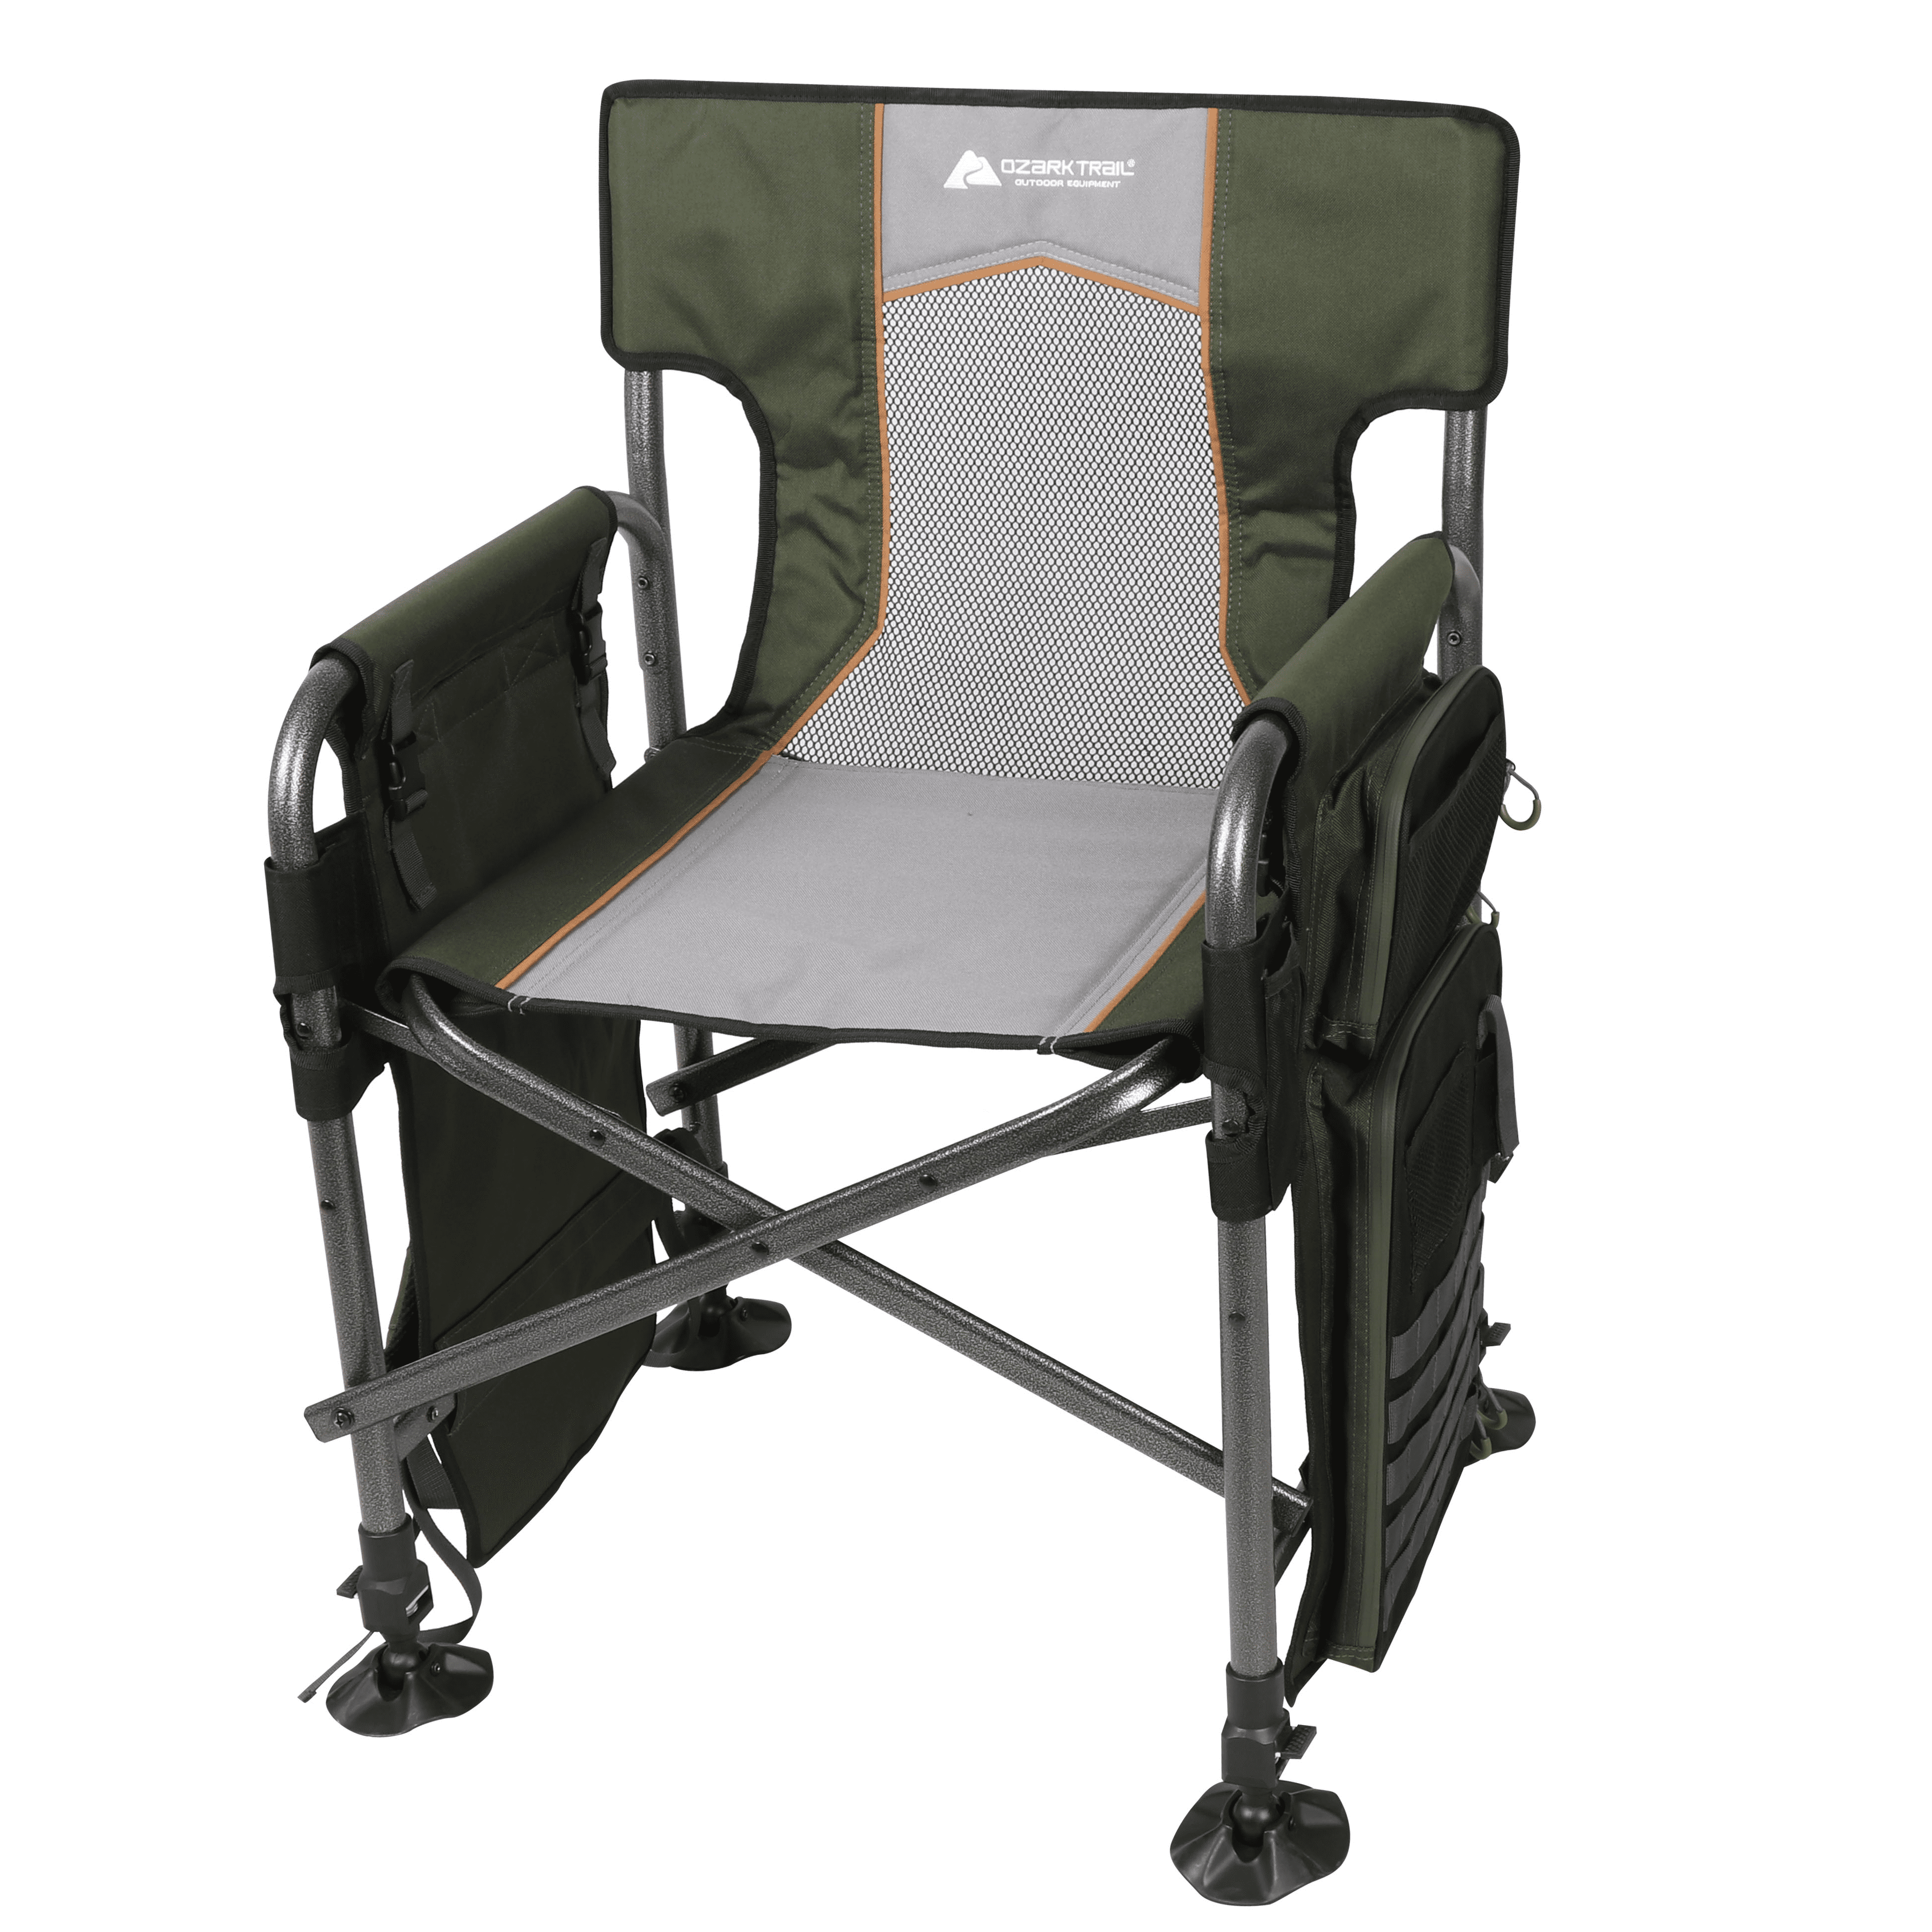 Blue Professional Chair Folding Chair Camp Chair Portable Outdoor Fishing Seat 